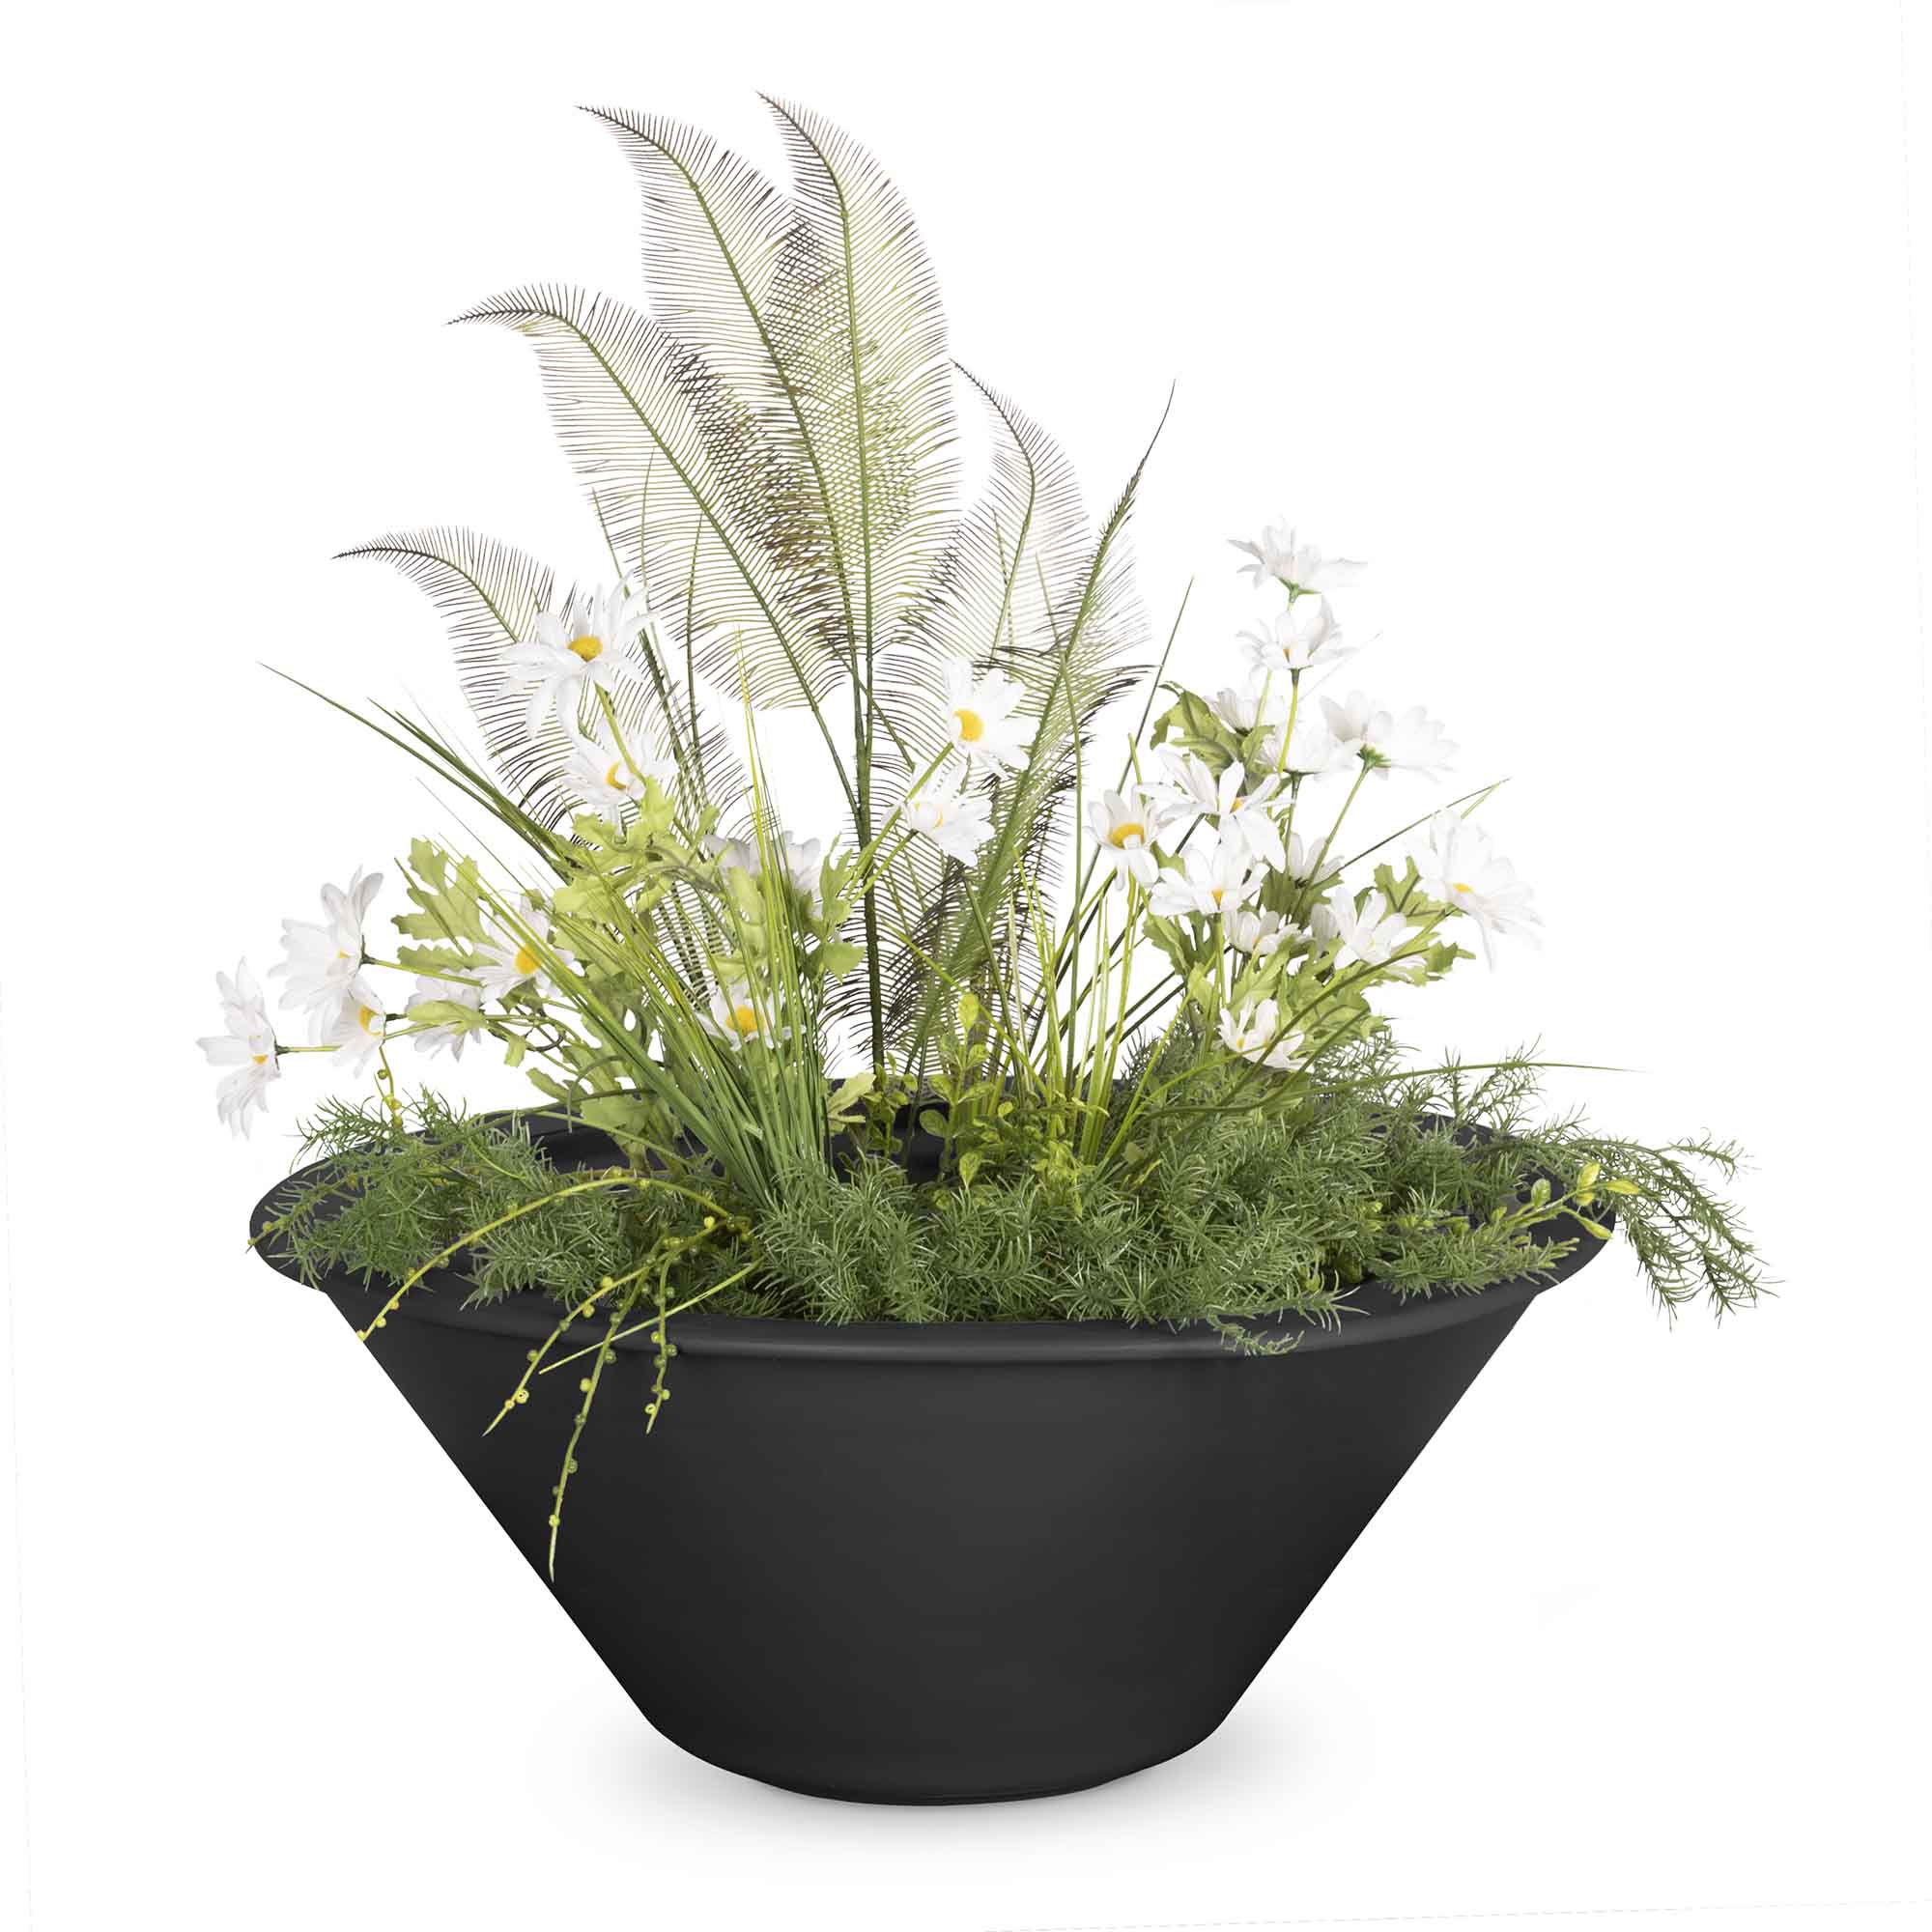 The Outdoor Plus Cazo Powder Coated Steel Planter Bowl